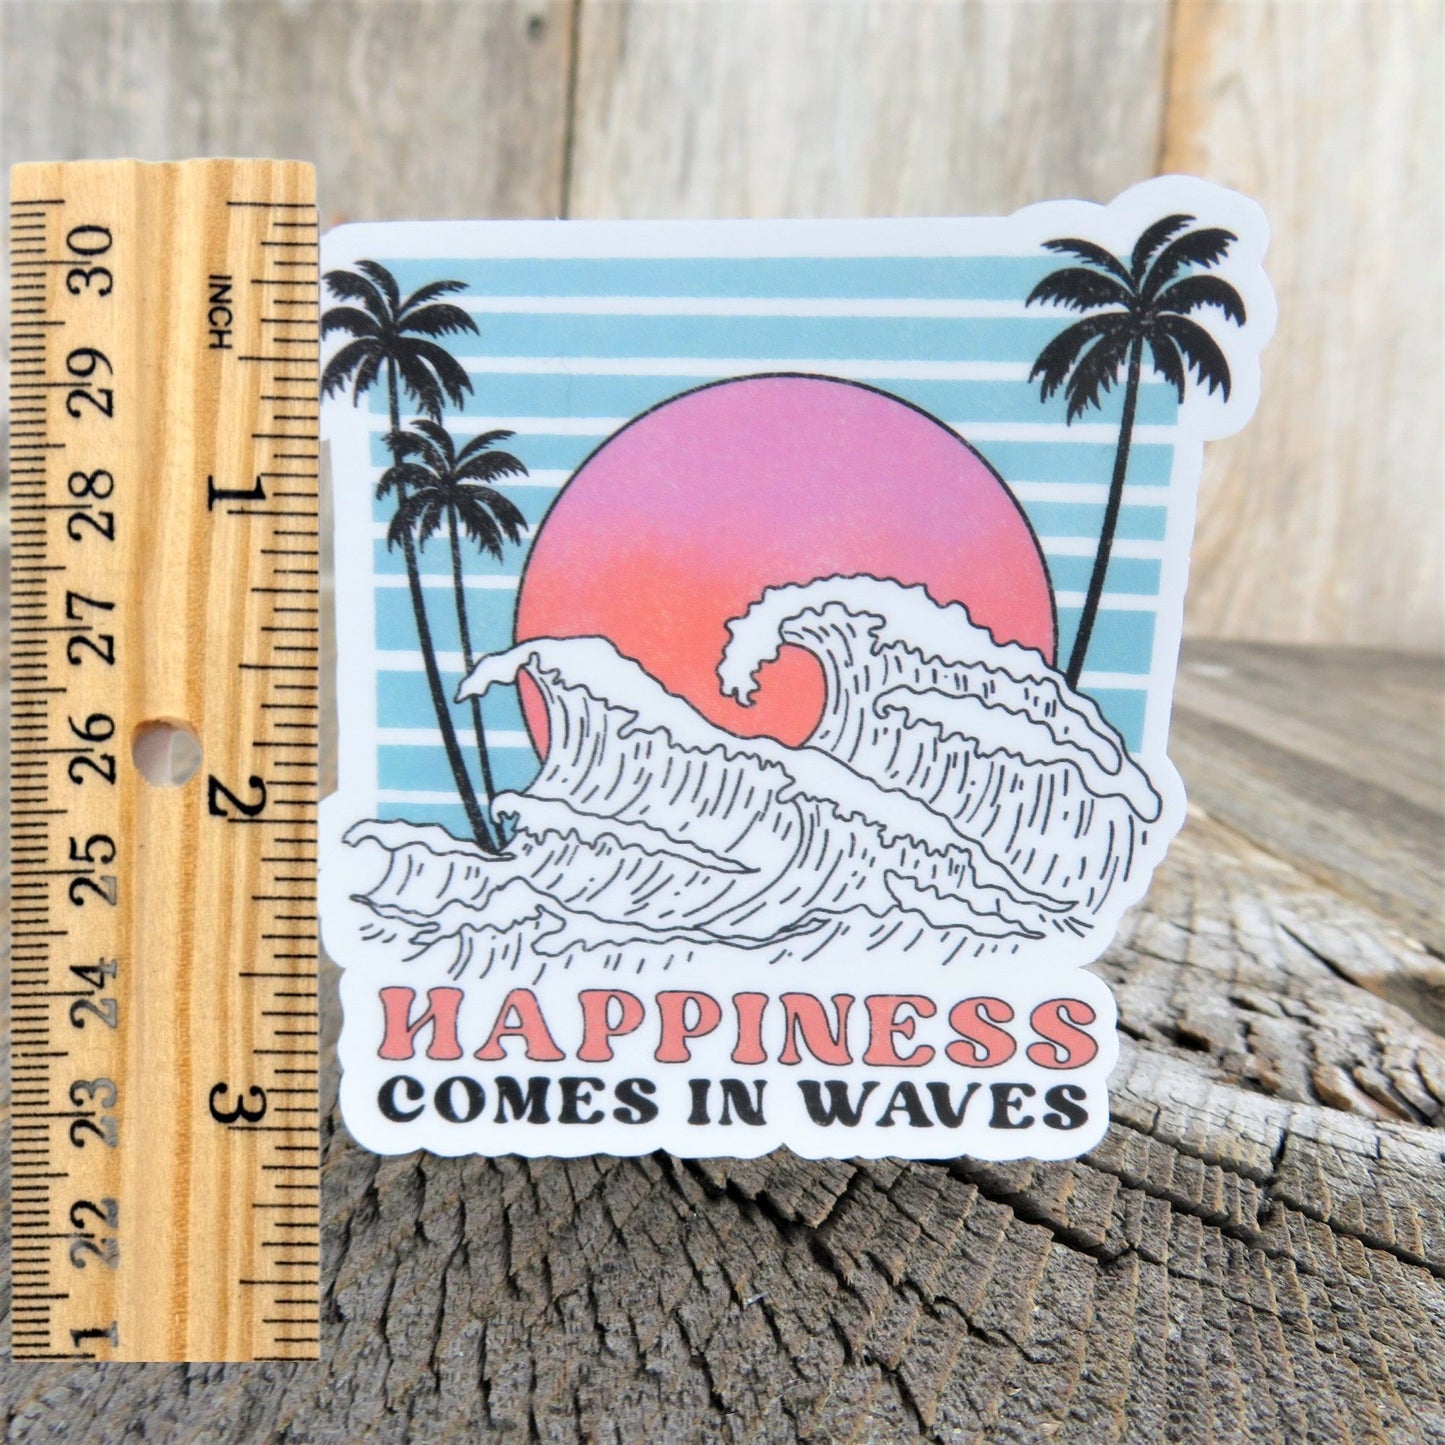 Happiness Comes in Waves Sticker Ocean Sunset Retro Colored Decal Palm Tree Waterproof Car Water Bottle Laptop